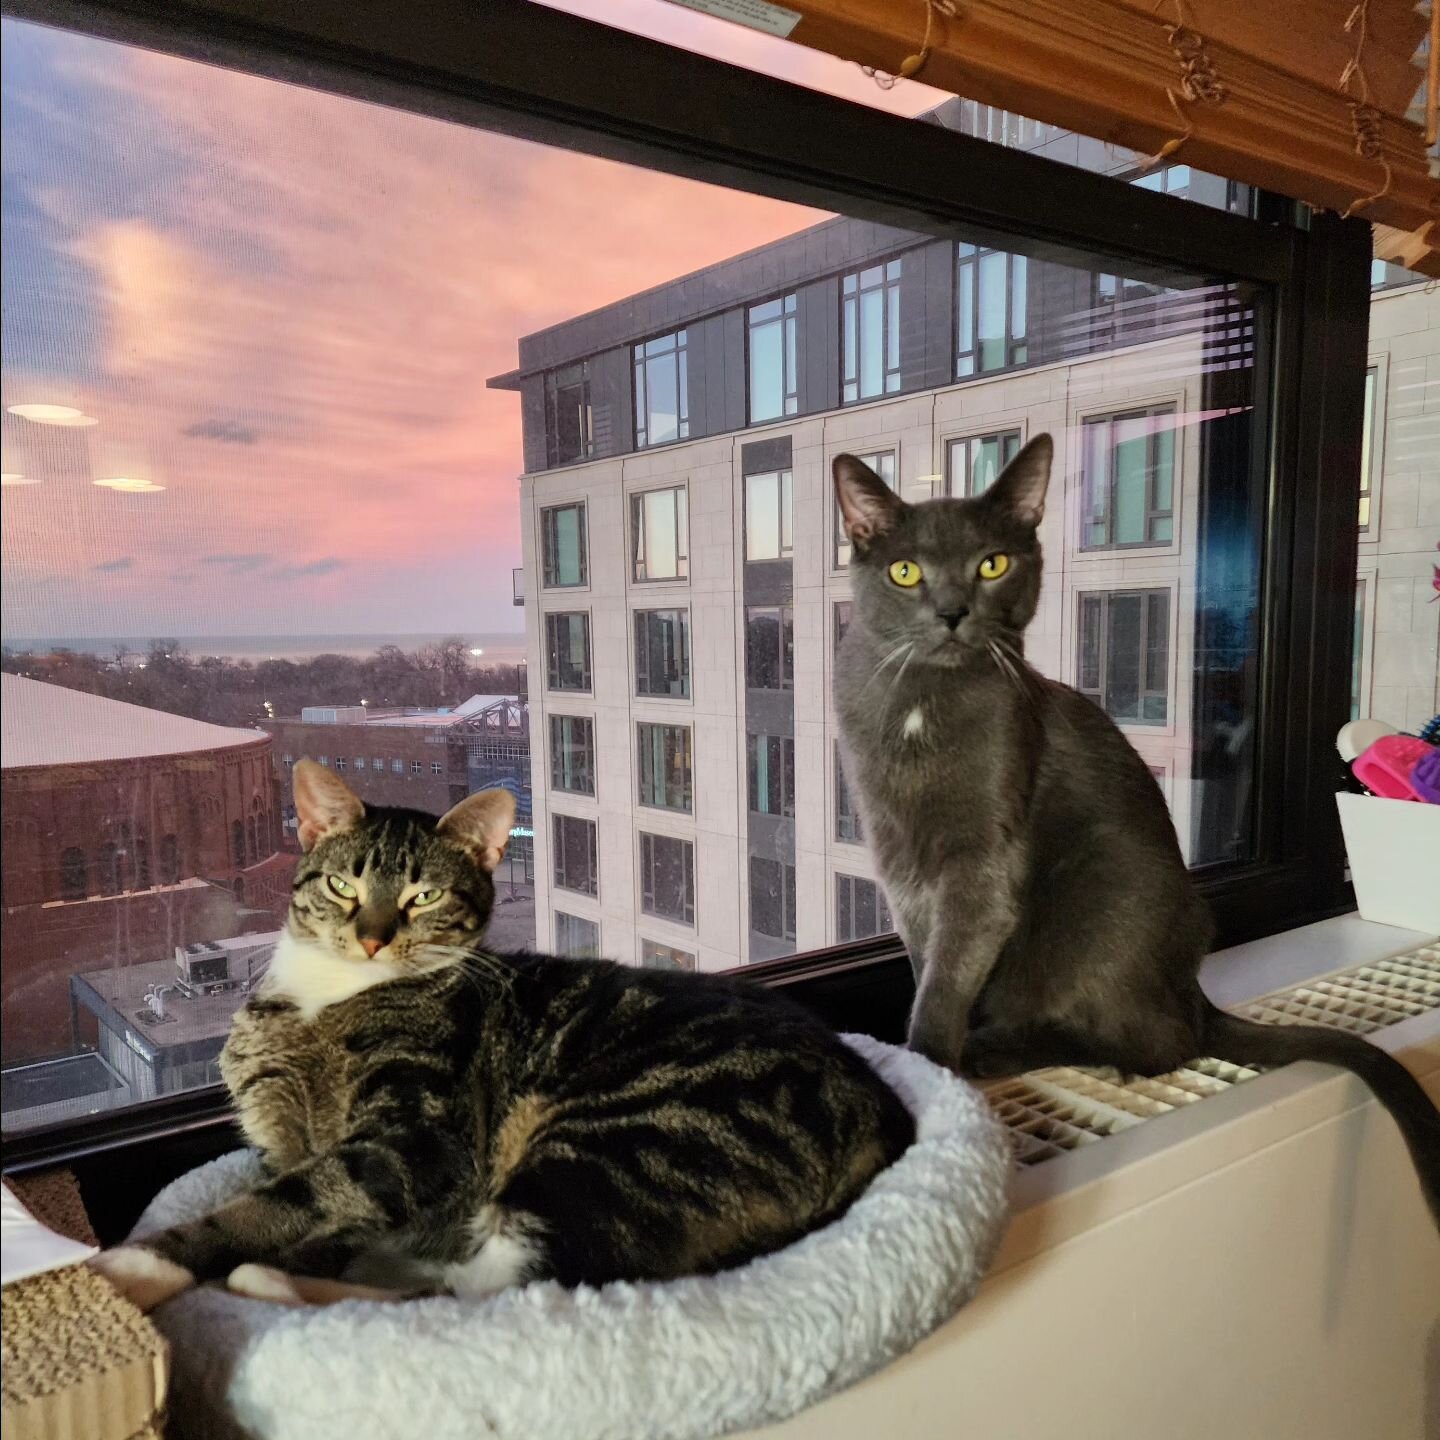 My beautiful babies with the sunset a few nights ago.  They are my heart ❤️